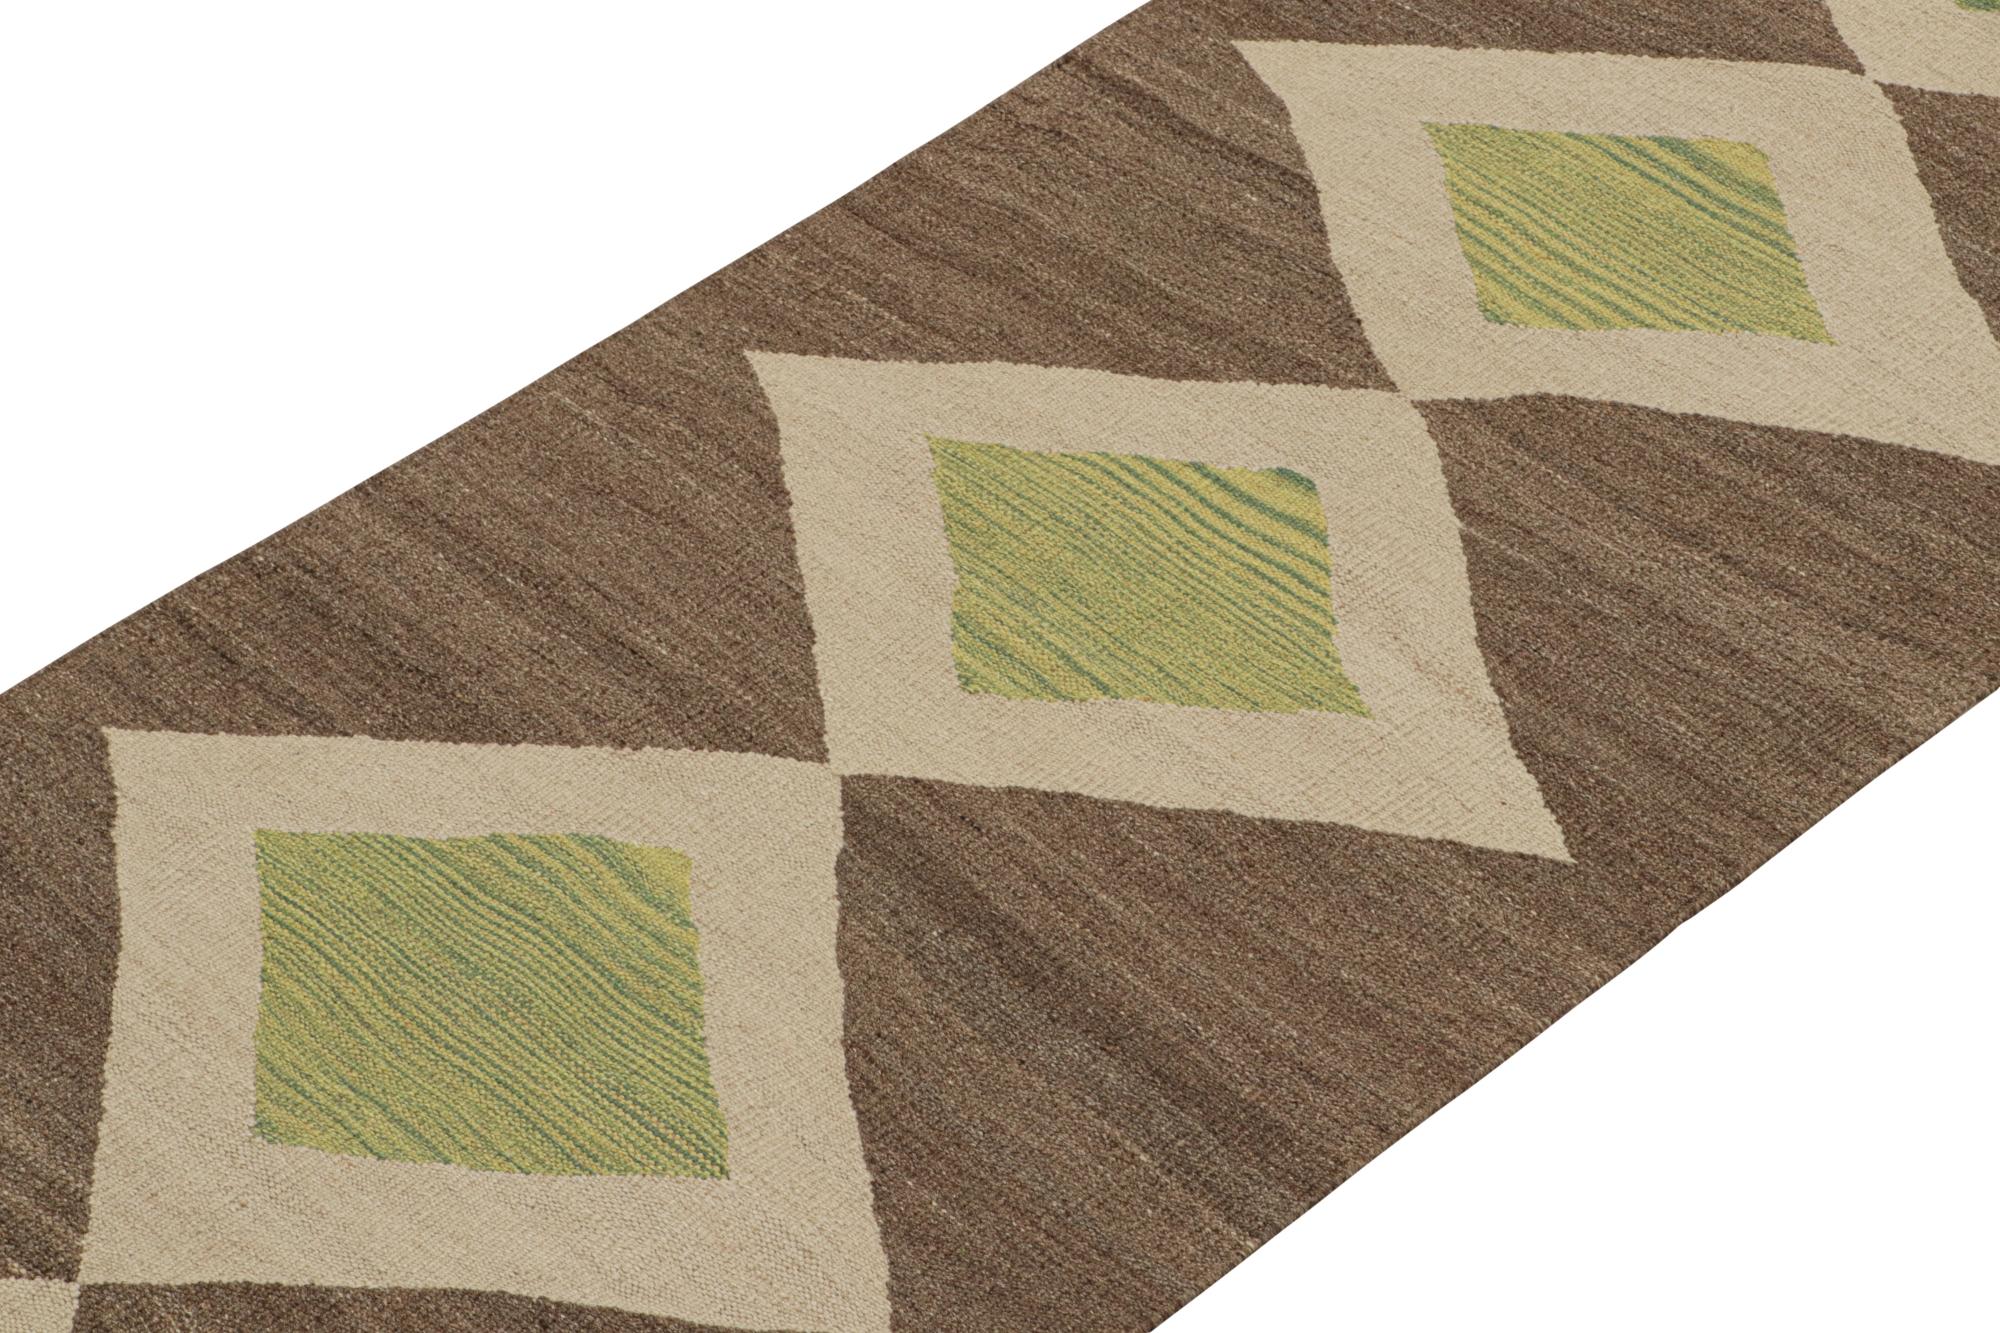 This vintage 2x10 Persian Kilim is a midcentury tribal runner, handwoven in wool circa 1950-1960.

On the Design:

This flatweave enjoys a play of beige-brown and green in diamond-shaped medallions on an open field. Keen eyes will note the